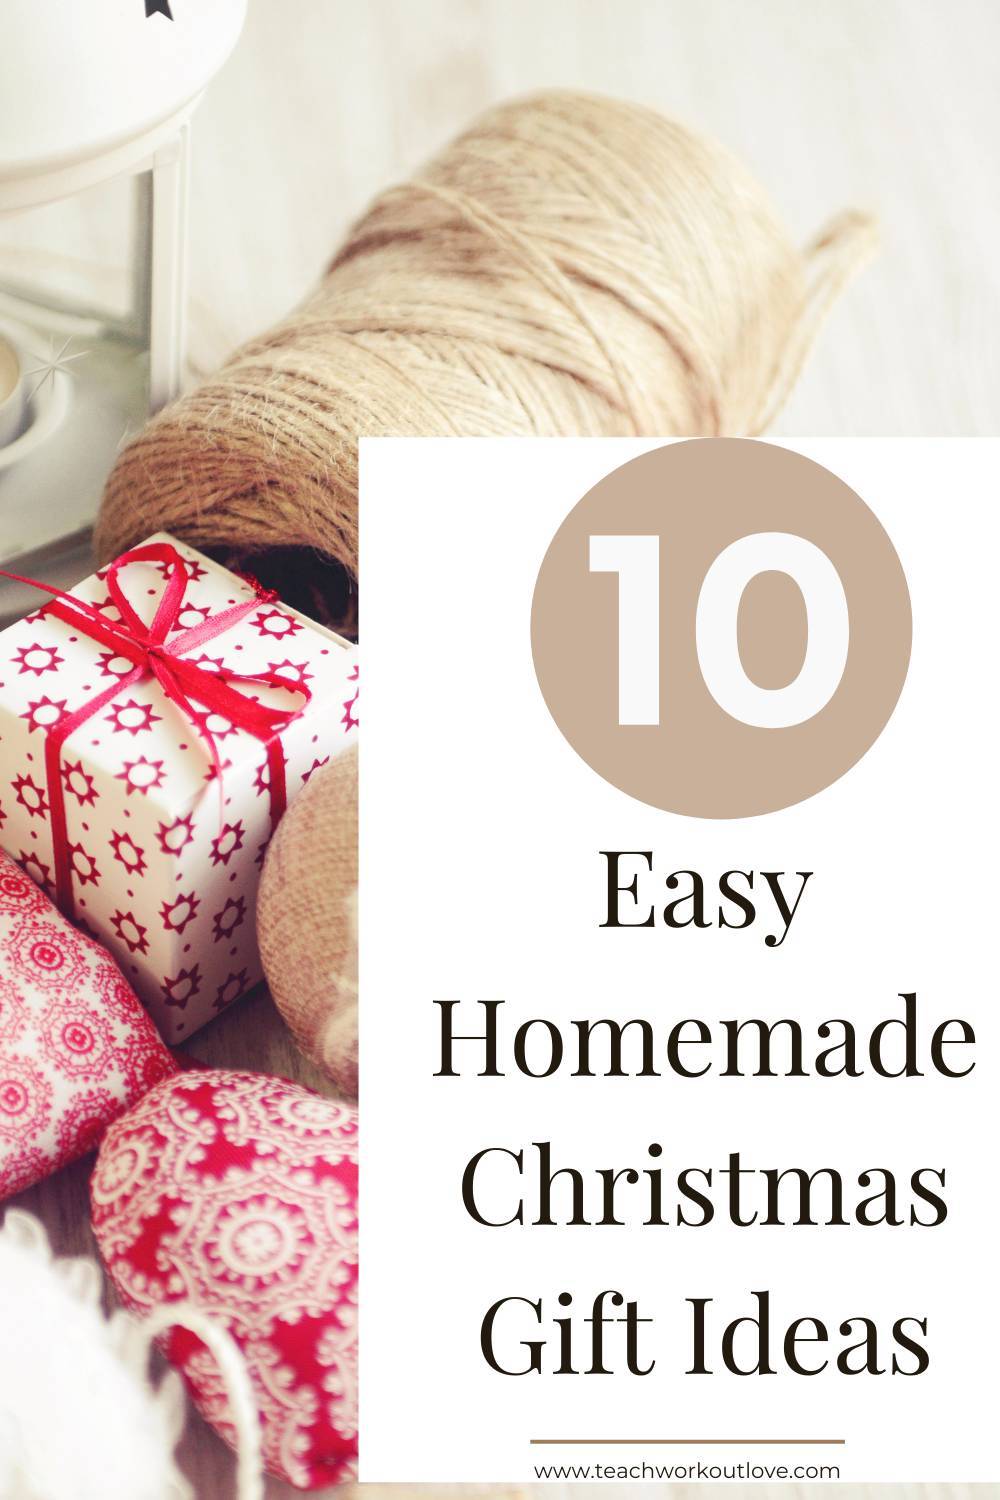 Here we have put together 10 easy homemade Christmas gift ideas. Make some creative handmade gifts for friends and family.